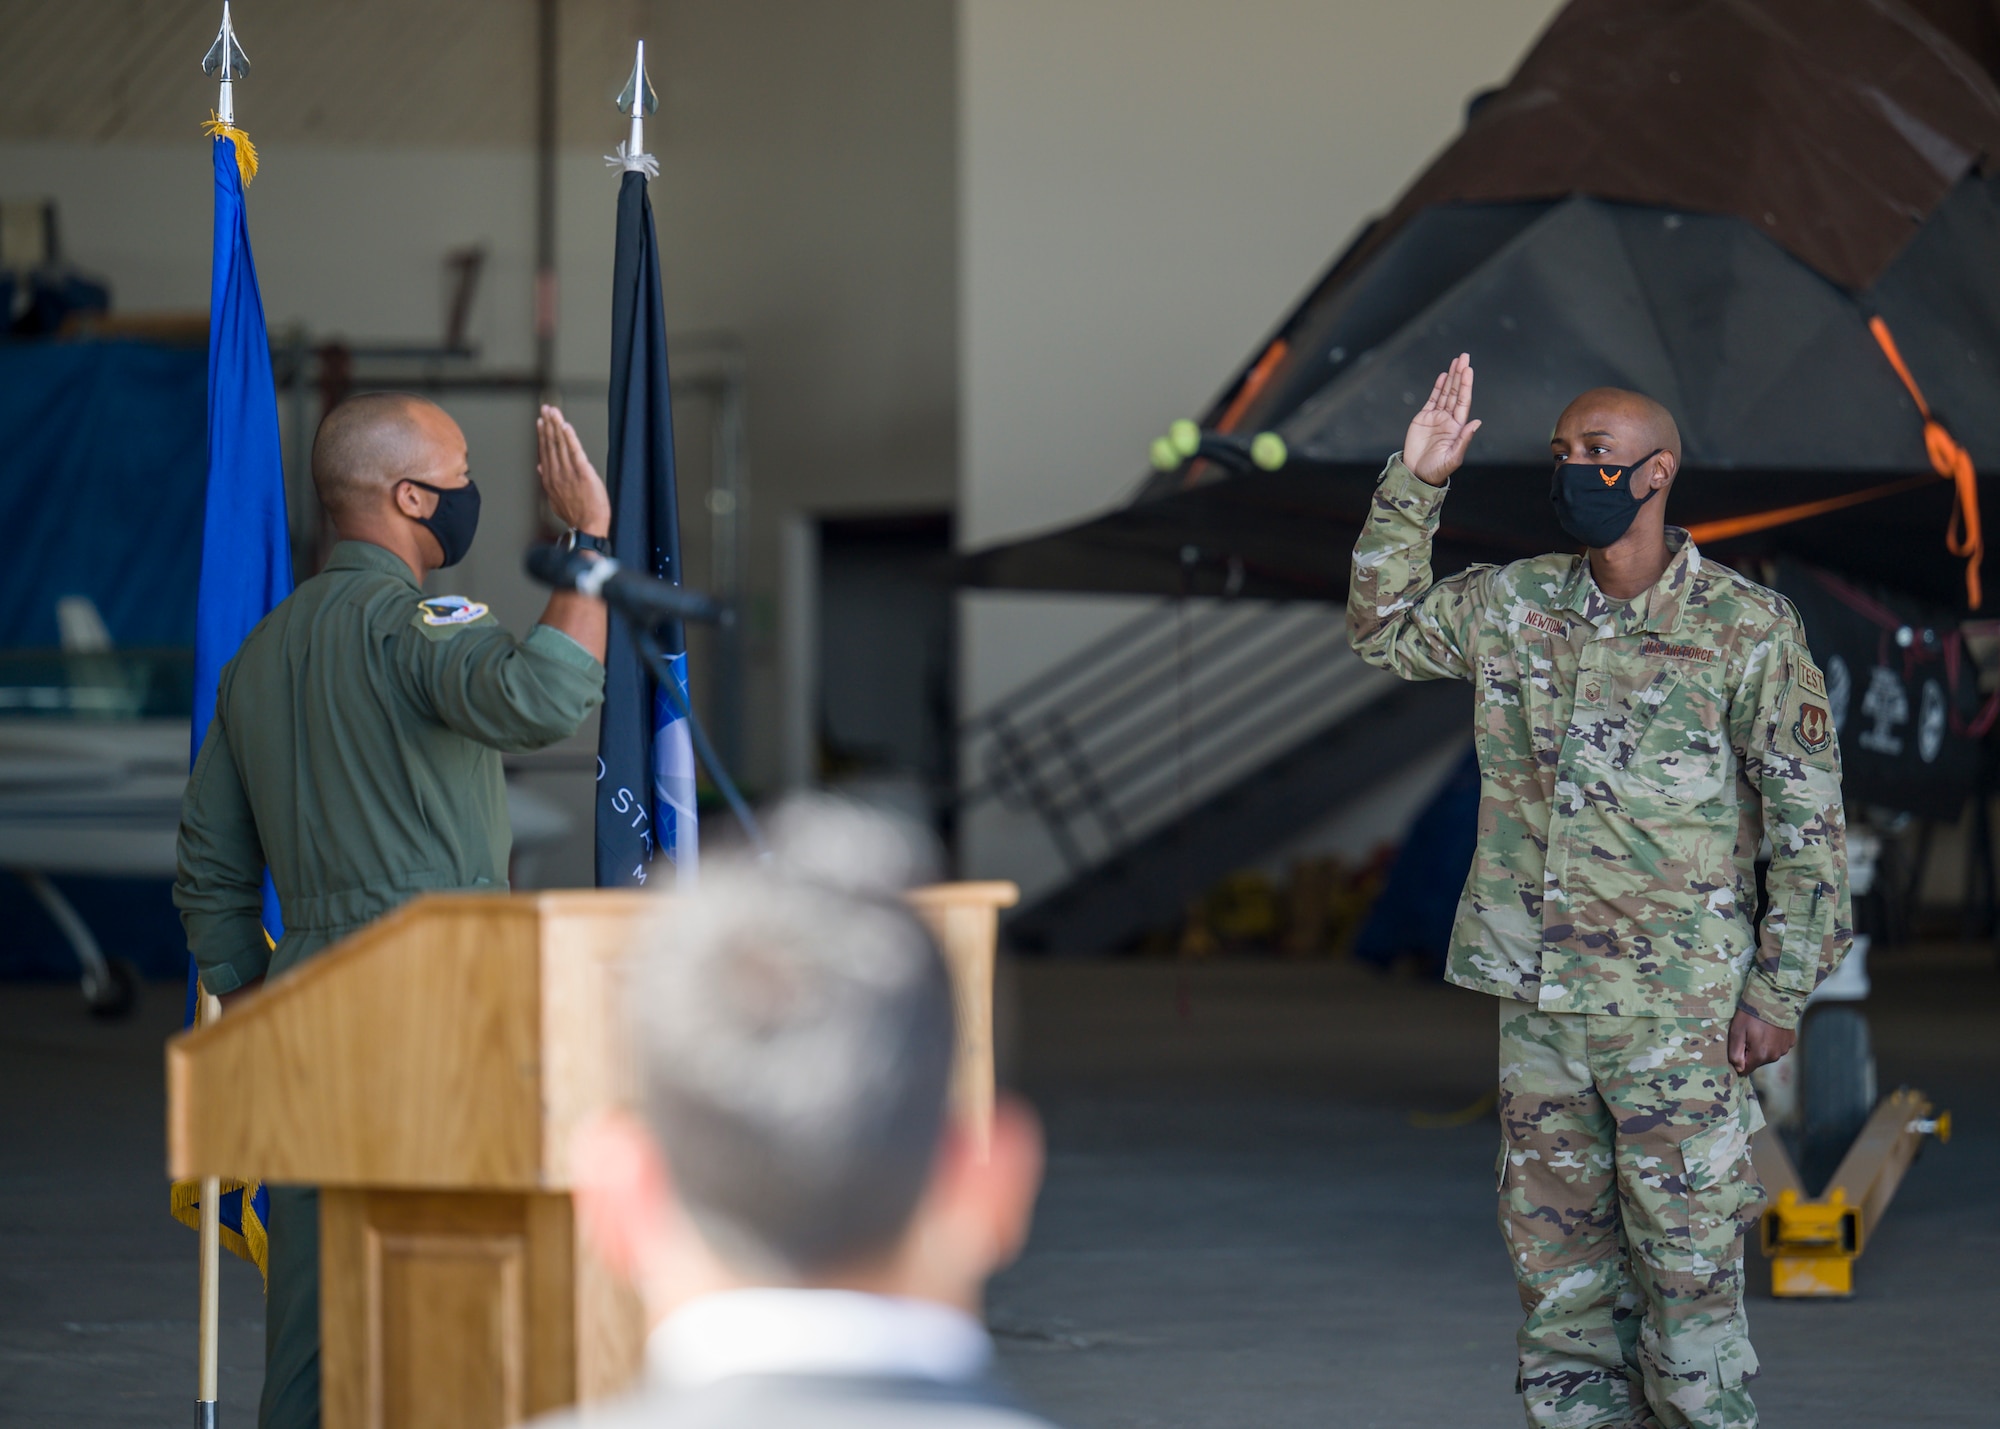 Master Sgt. Sheldon Newton, 412th Communications Squadron, originally of Watha, North Carolina, recites oath of enlistment during a Space Force Transfer Ceremony at Edwards Air Force Base, California, Feb. 11. (Air Force photo by Giancarlo Casem)